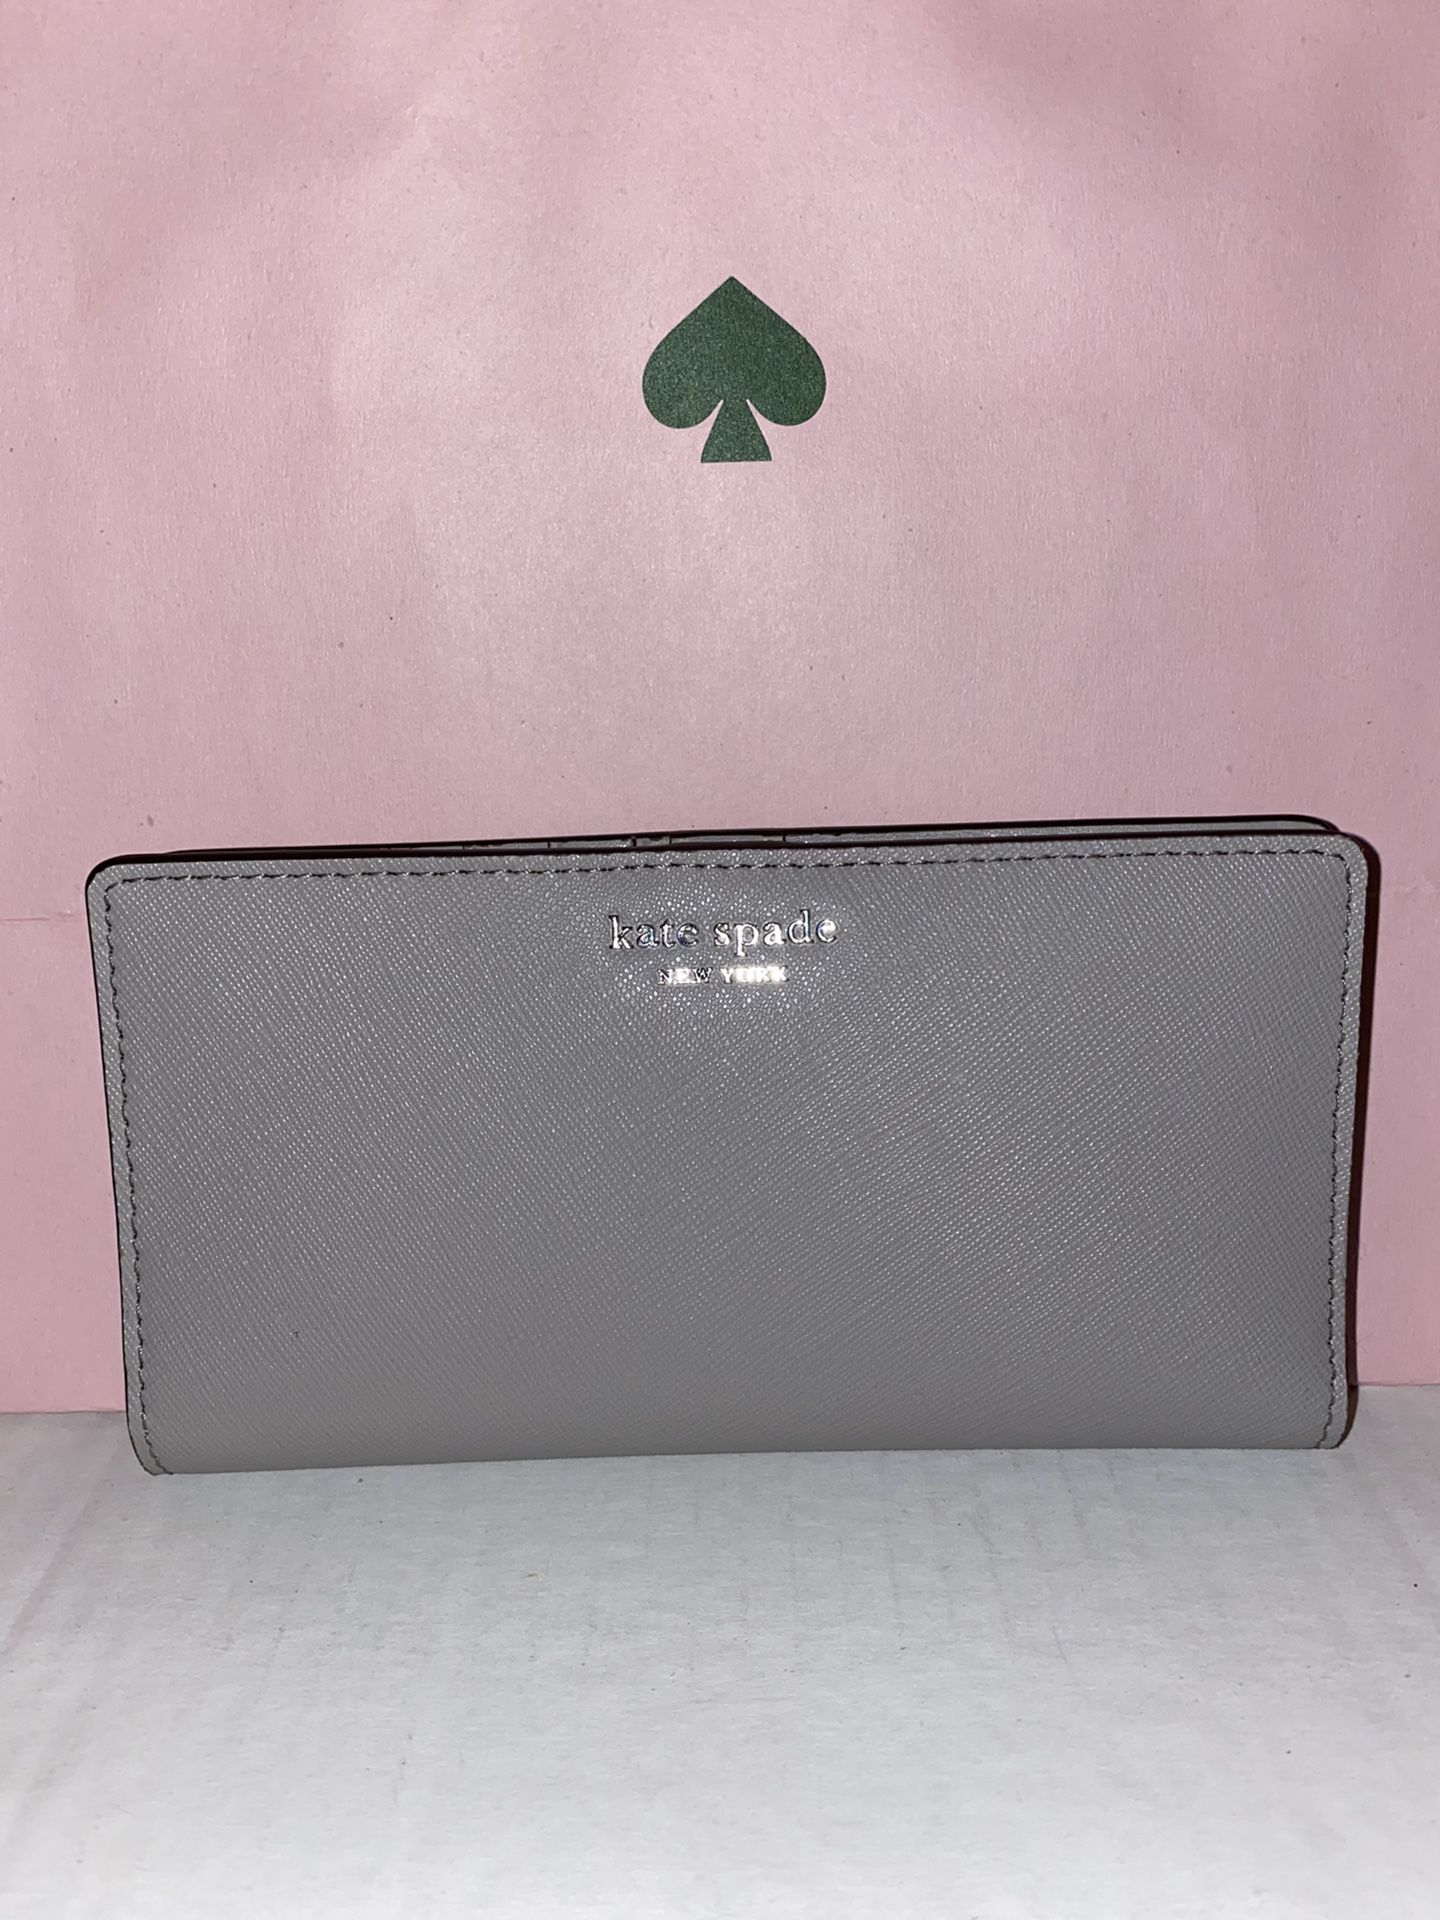 Kate Spade - Brand New Wallet!! W/tags